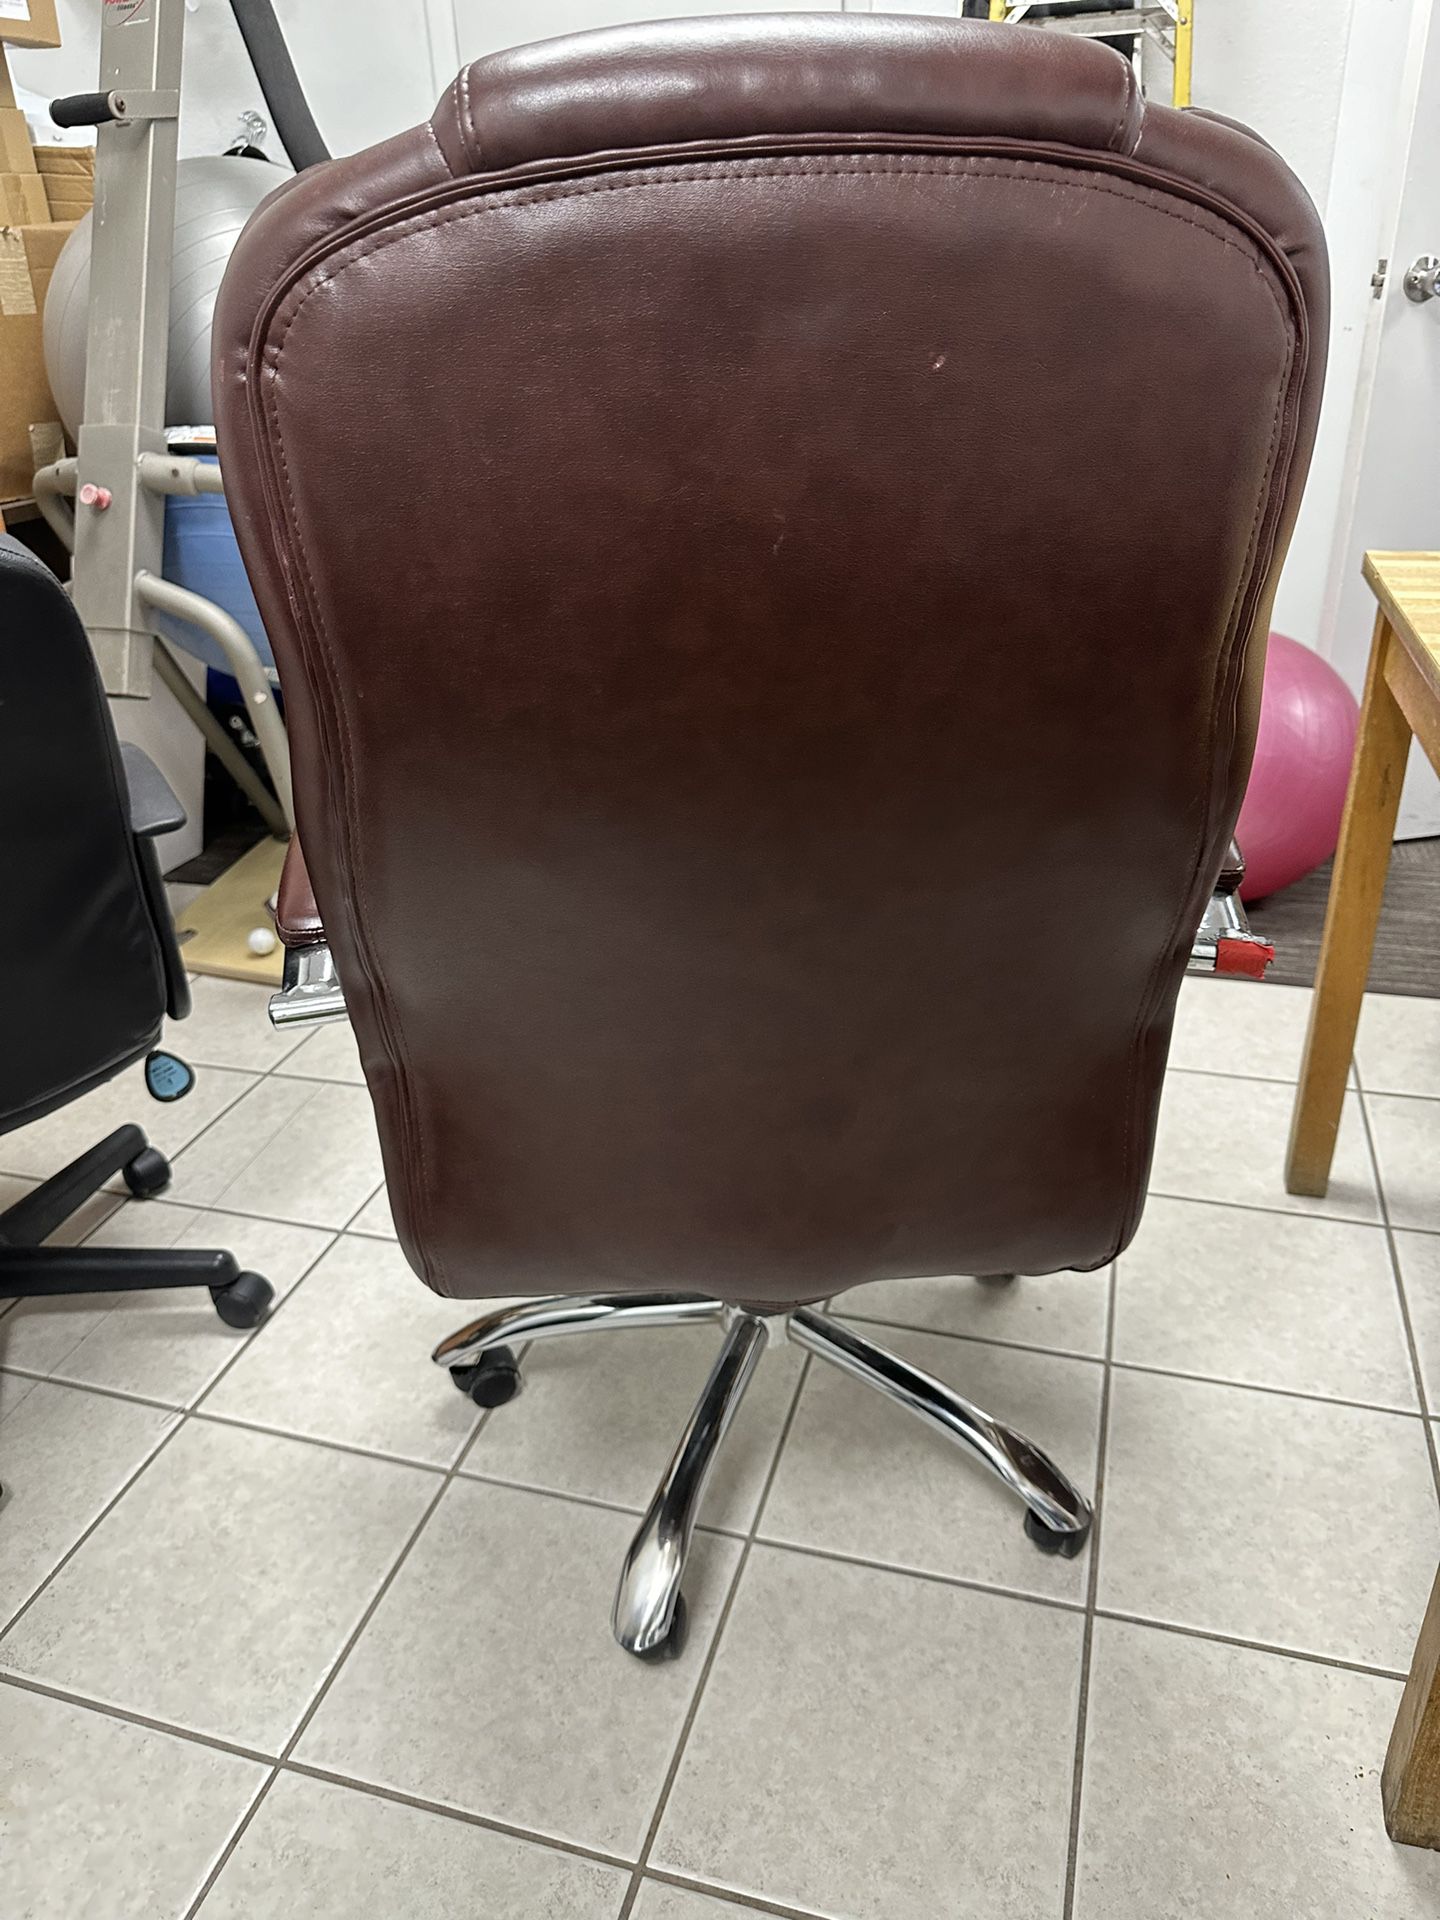 Chair Leather